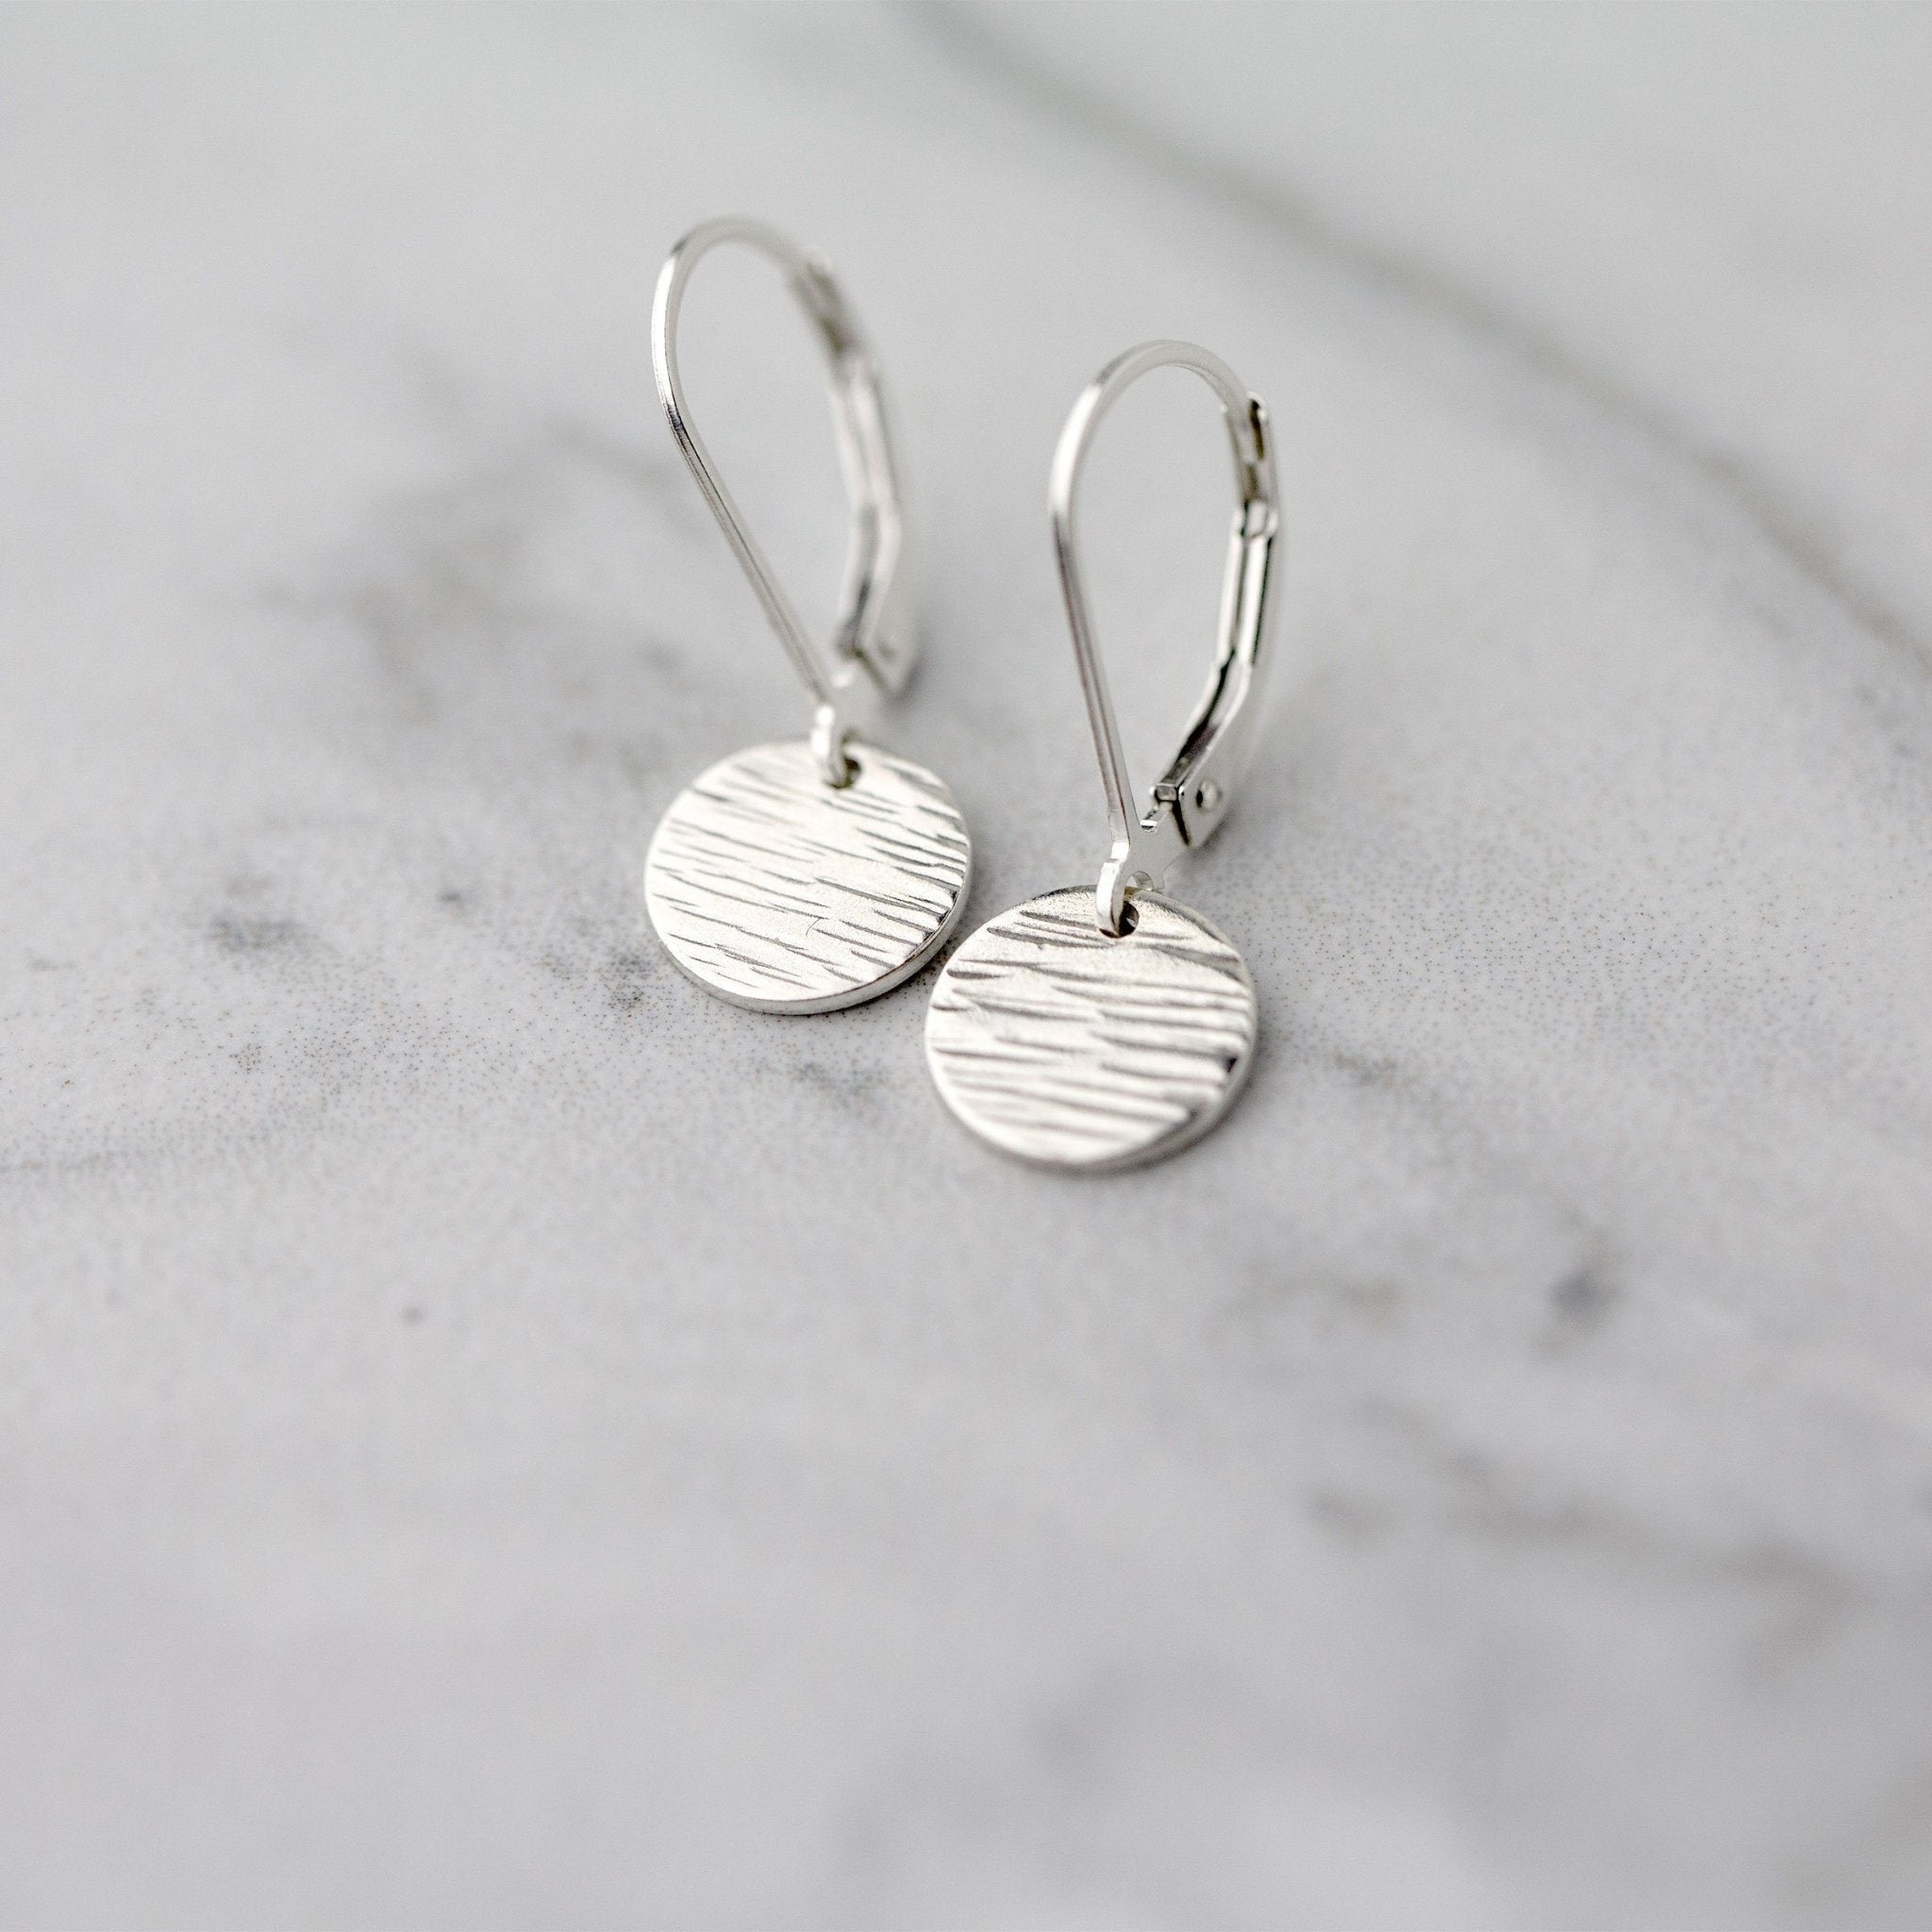 Silver Textured Disc Lever-back Earrings - Handmade Jewelry by Burnish